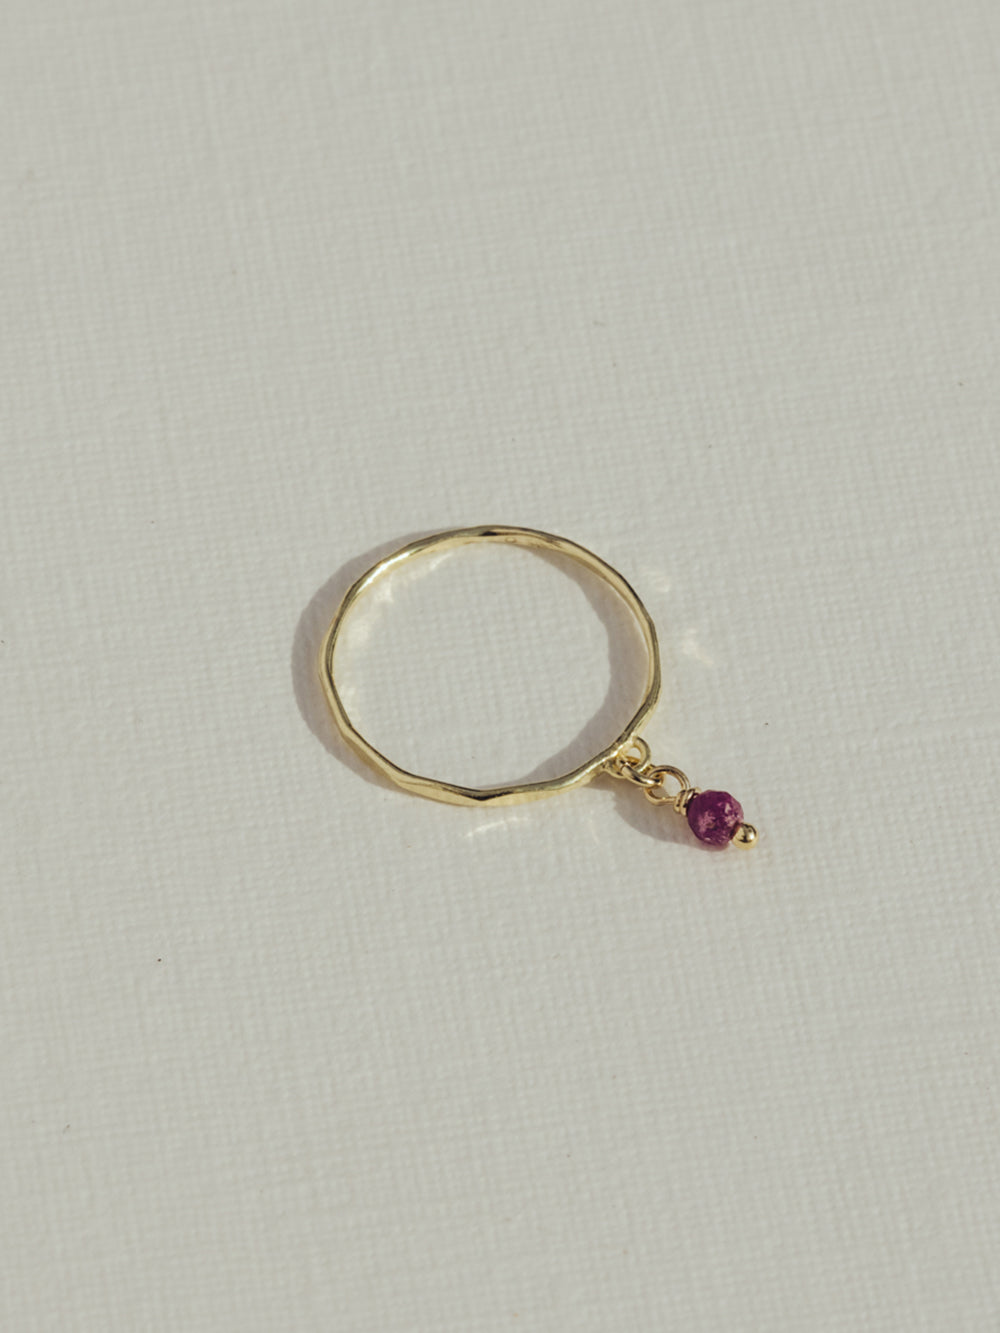 Birthstone ring July - Ruby | 14K Gold Plated